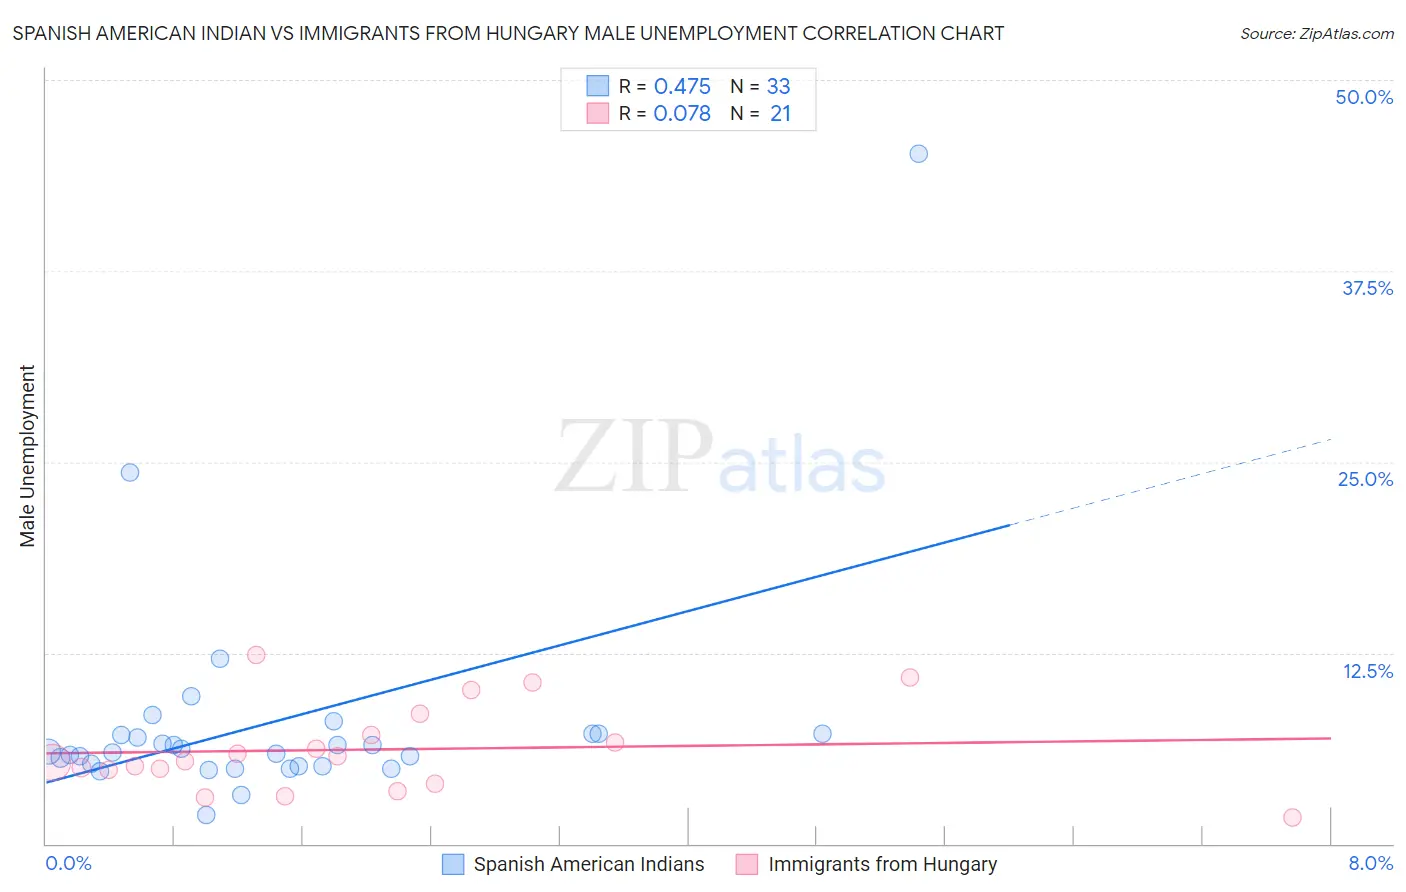 Spanish American Indian vs Immigrants from Hungary Male Unemployment